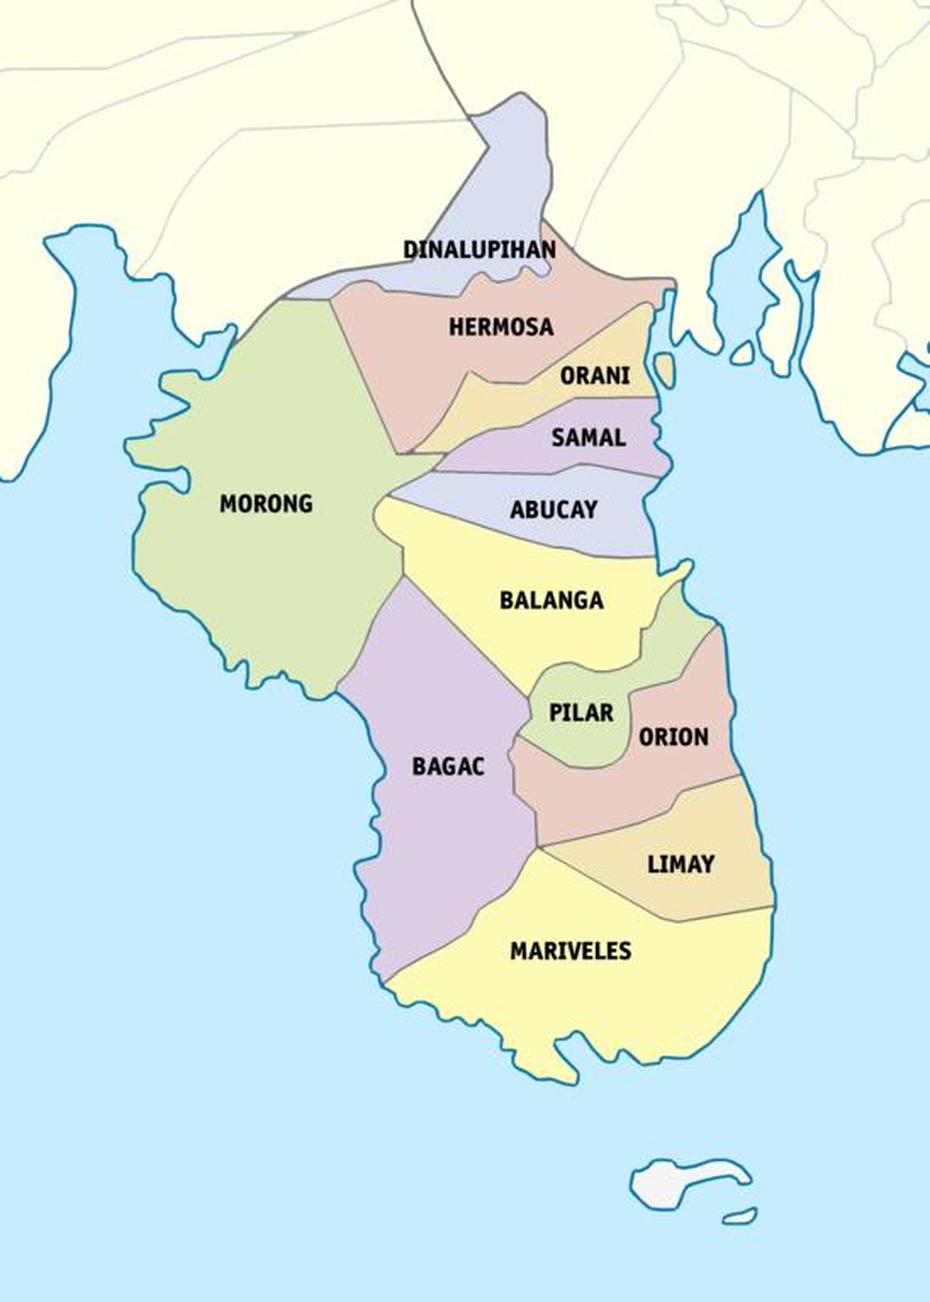 Get To Know The Bataan Province In The Philippines, Batan, Philippines, Orion Bataan, Bataan Location